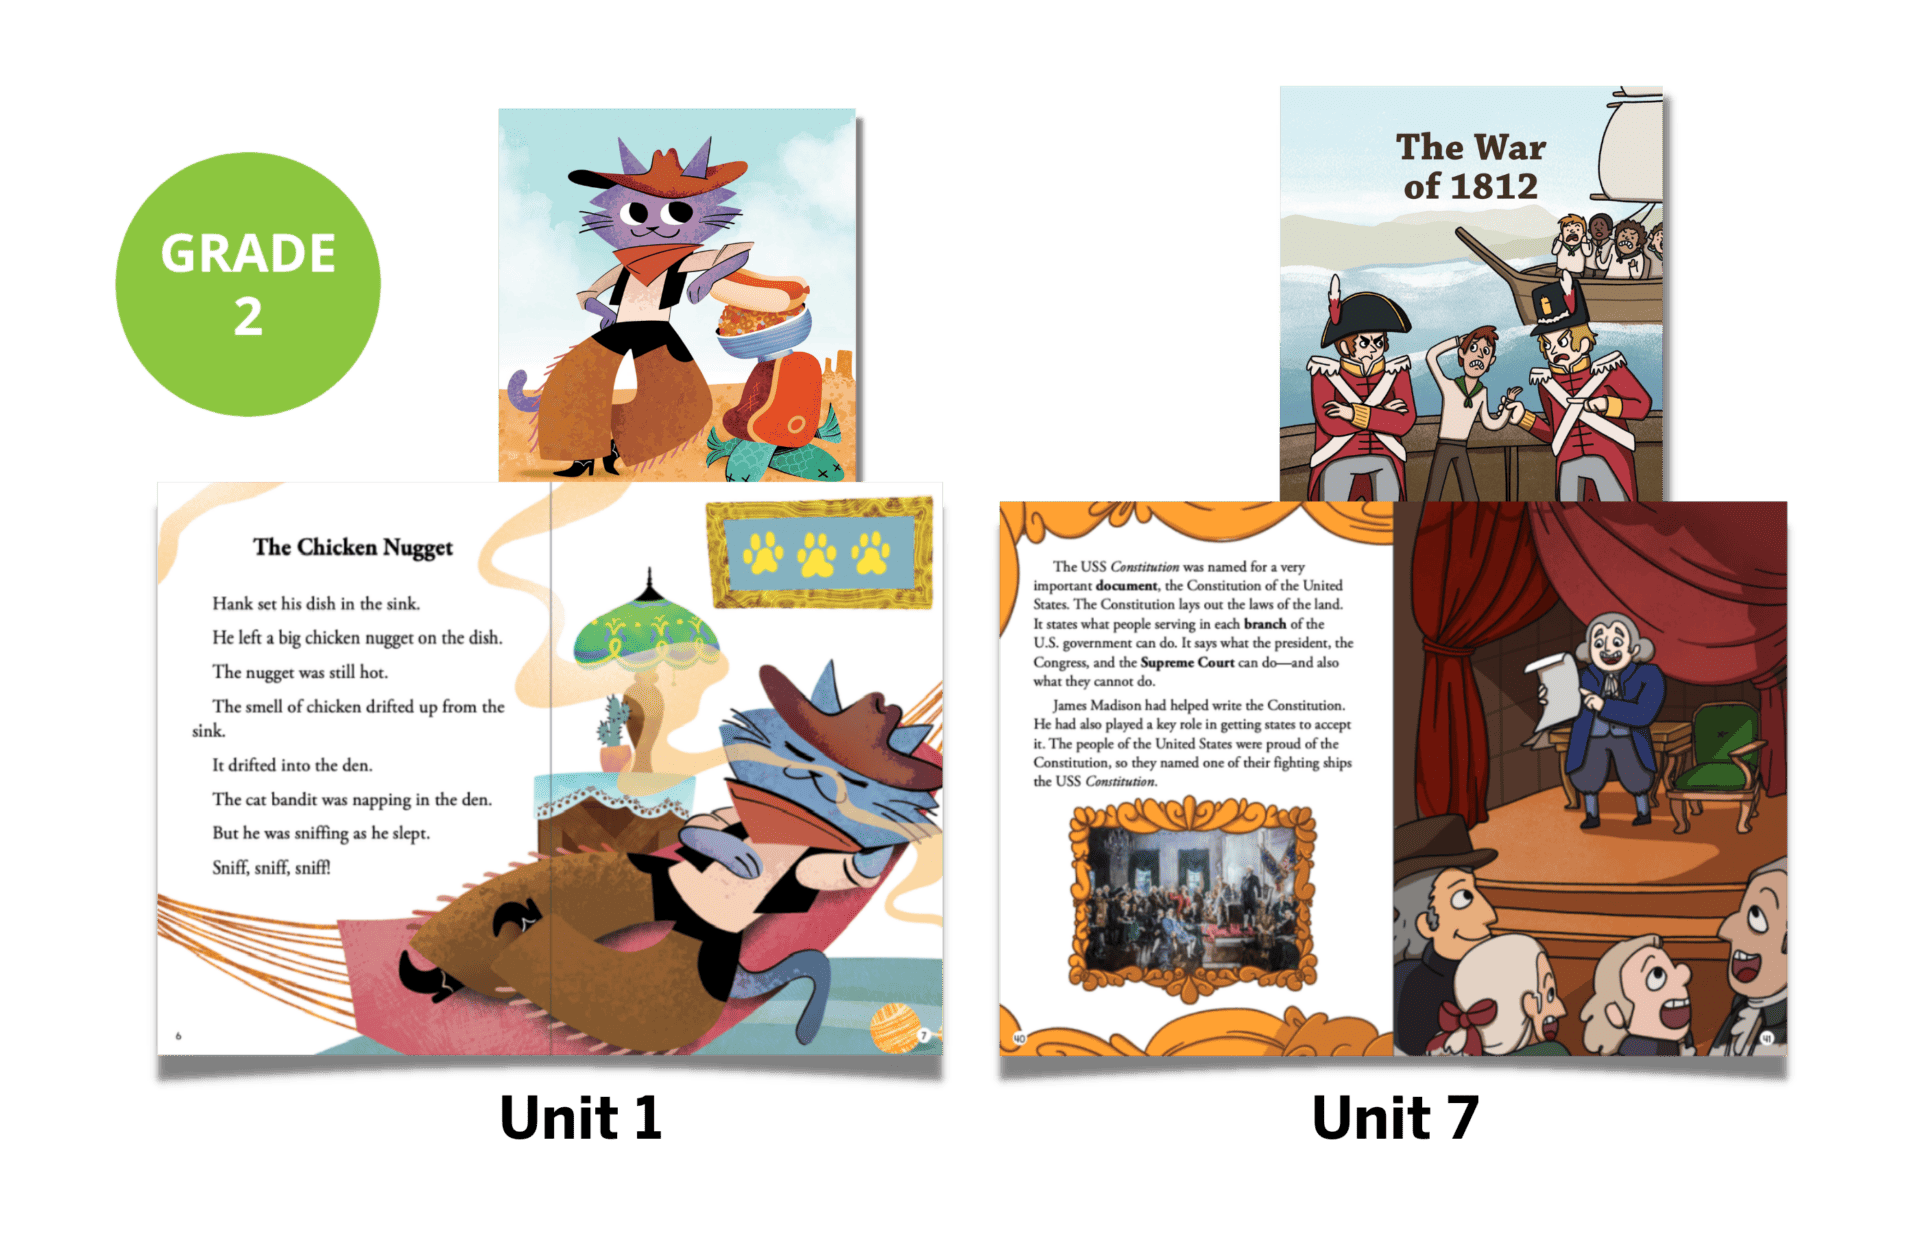 Open educational book for grade 2, showing illustrations and text about a chicken nugget story and the war of 1812.